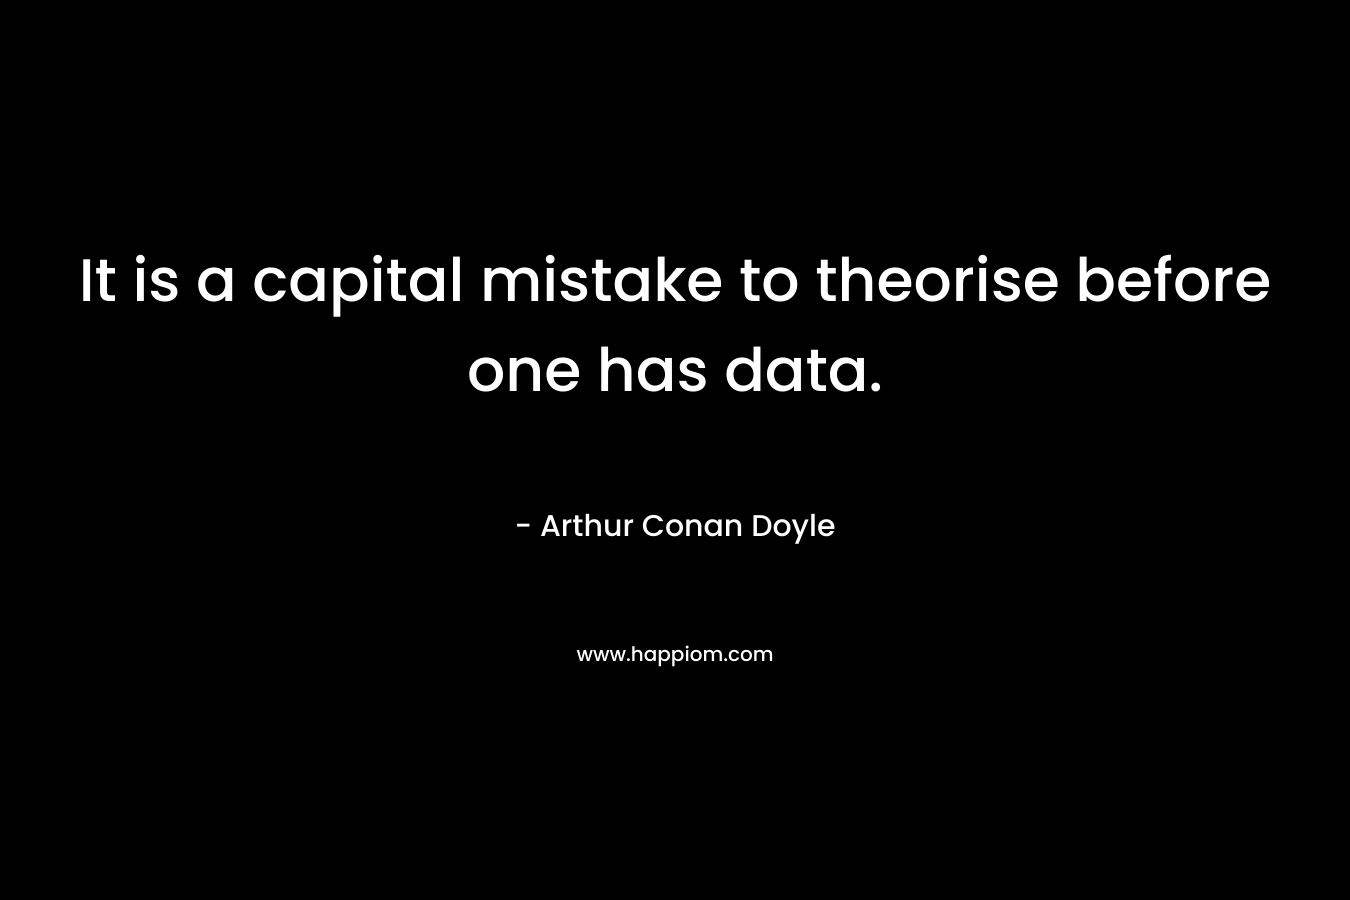 It is a capital mistake to theorise before one has data.